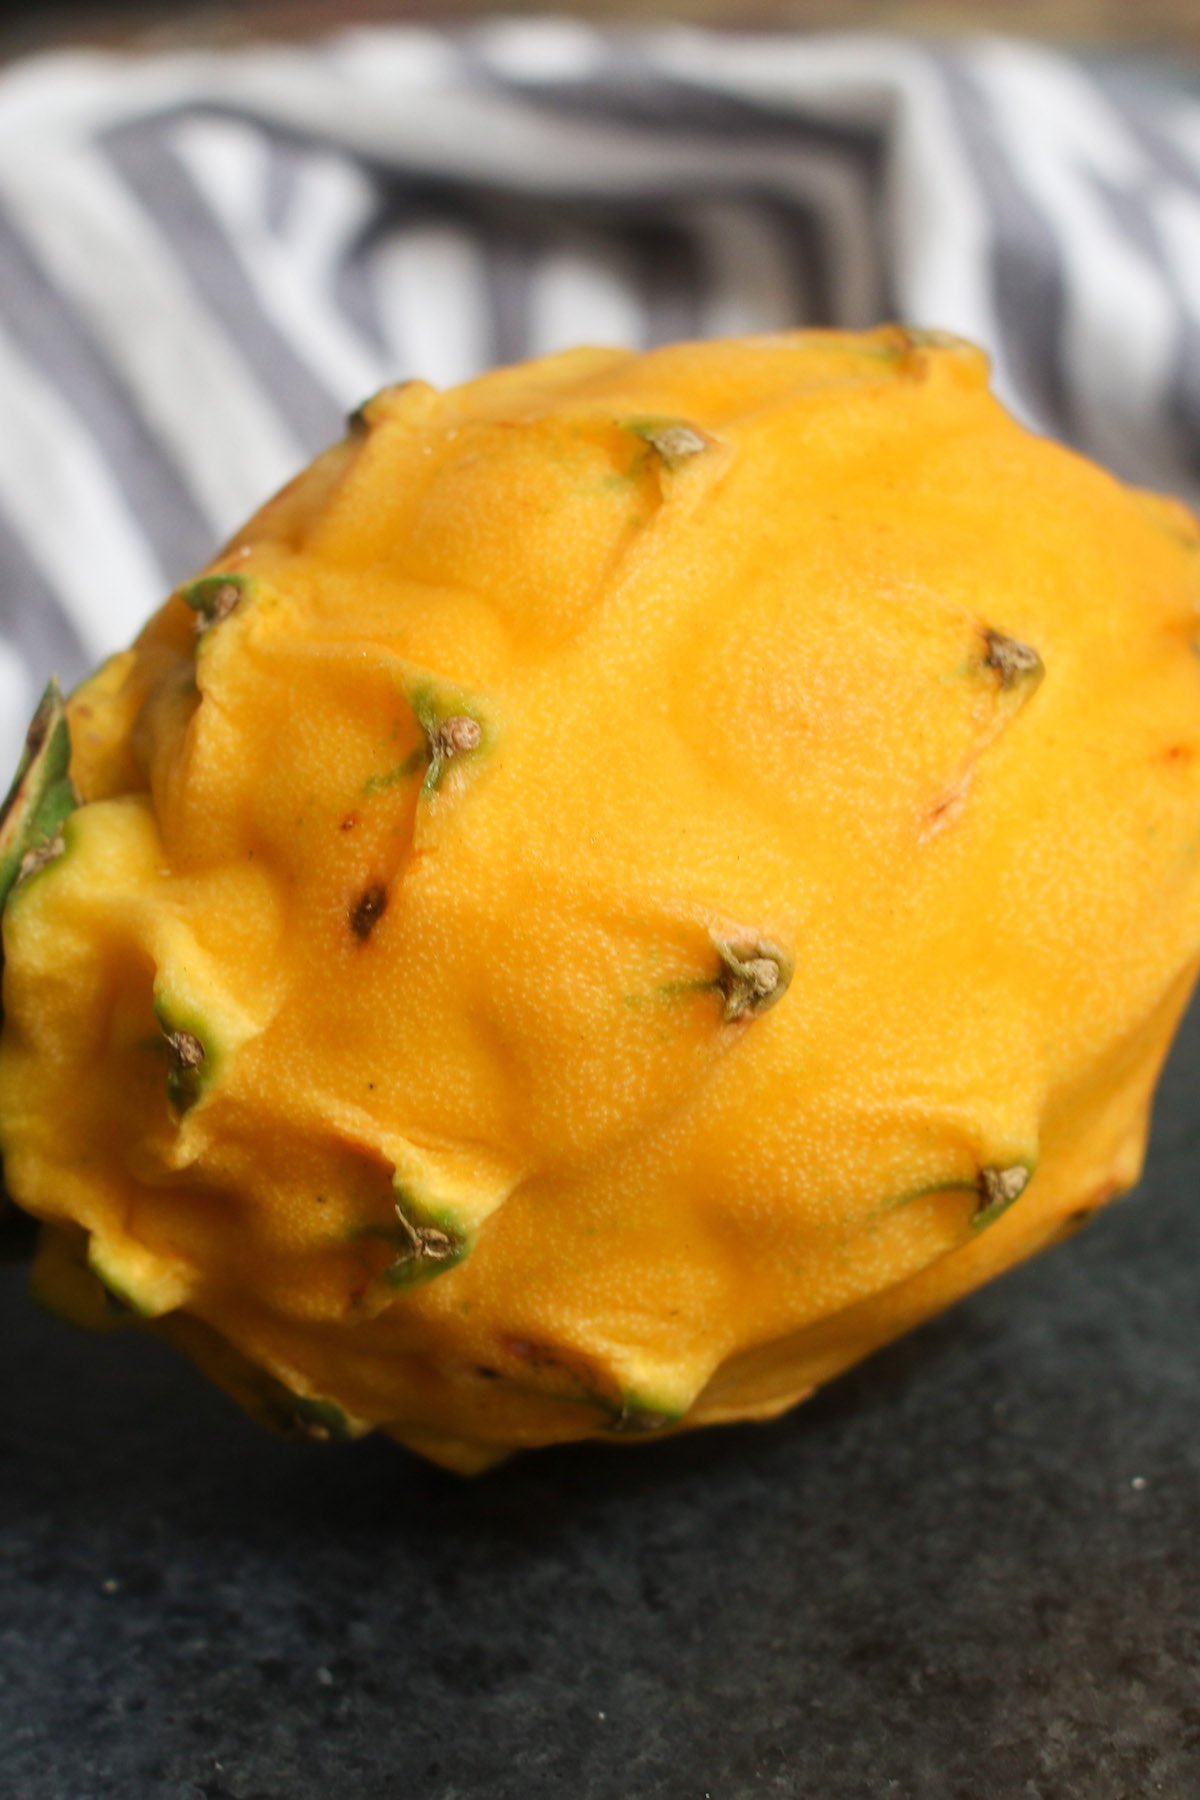 Closeup of a yellow pitaya with a few small blemishes which are not a concern